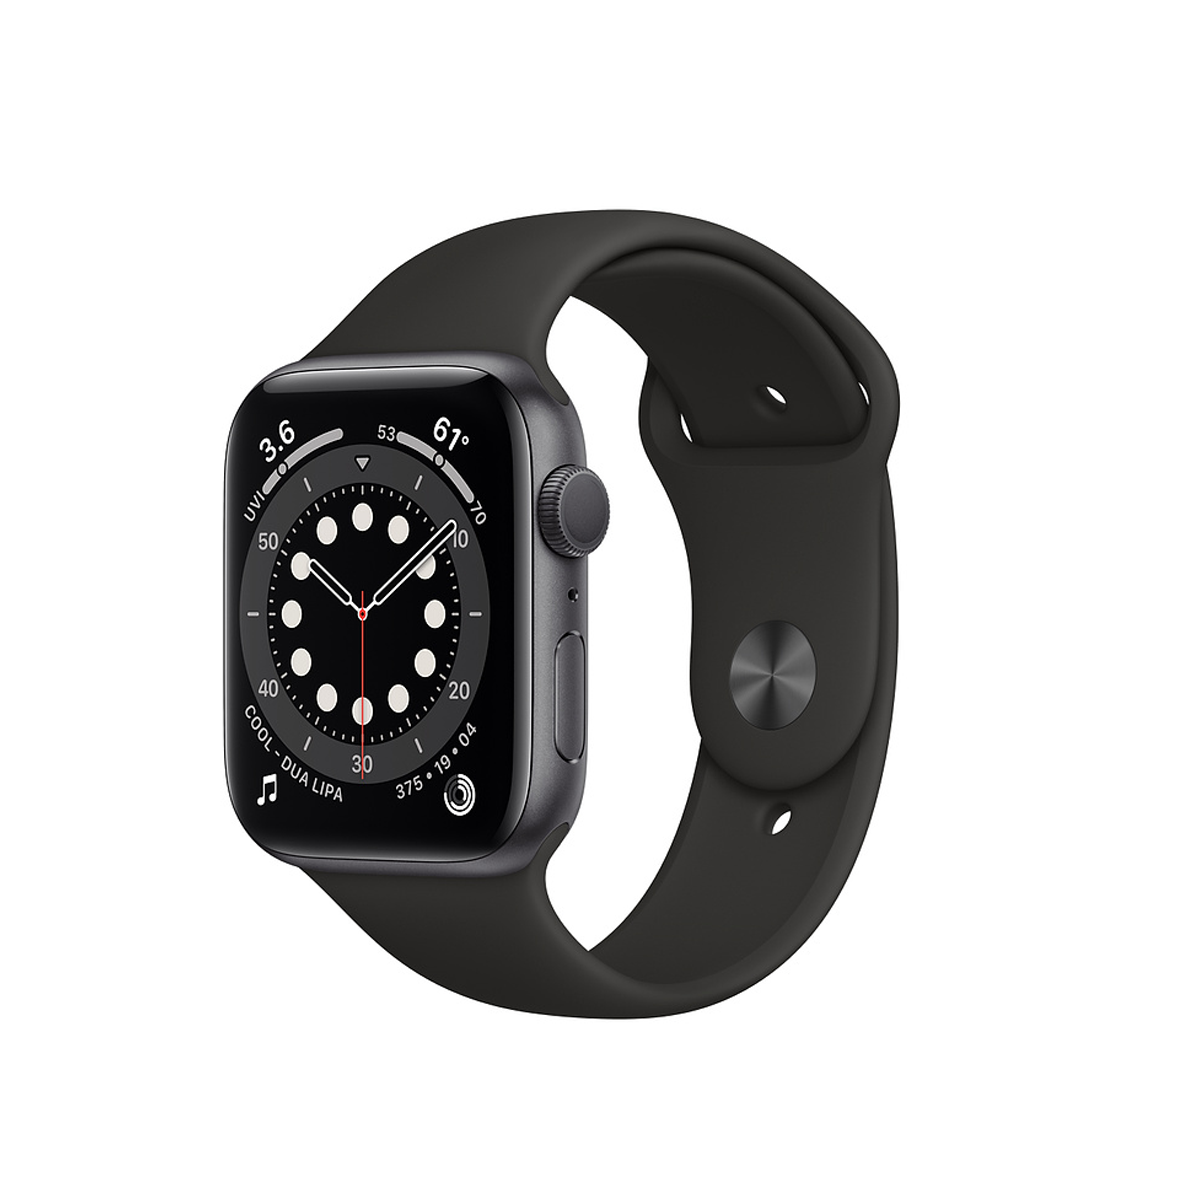 Apple Watch Series 6 GPS, 44mm Space Gray Aluminum Case with Black Sport Band - Regular